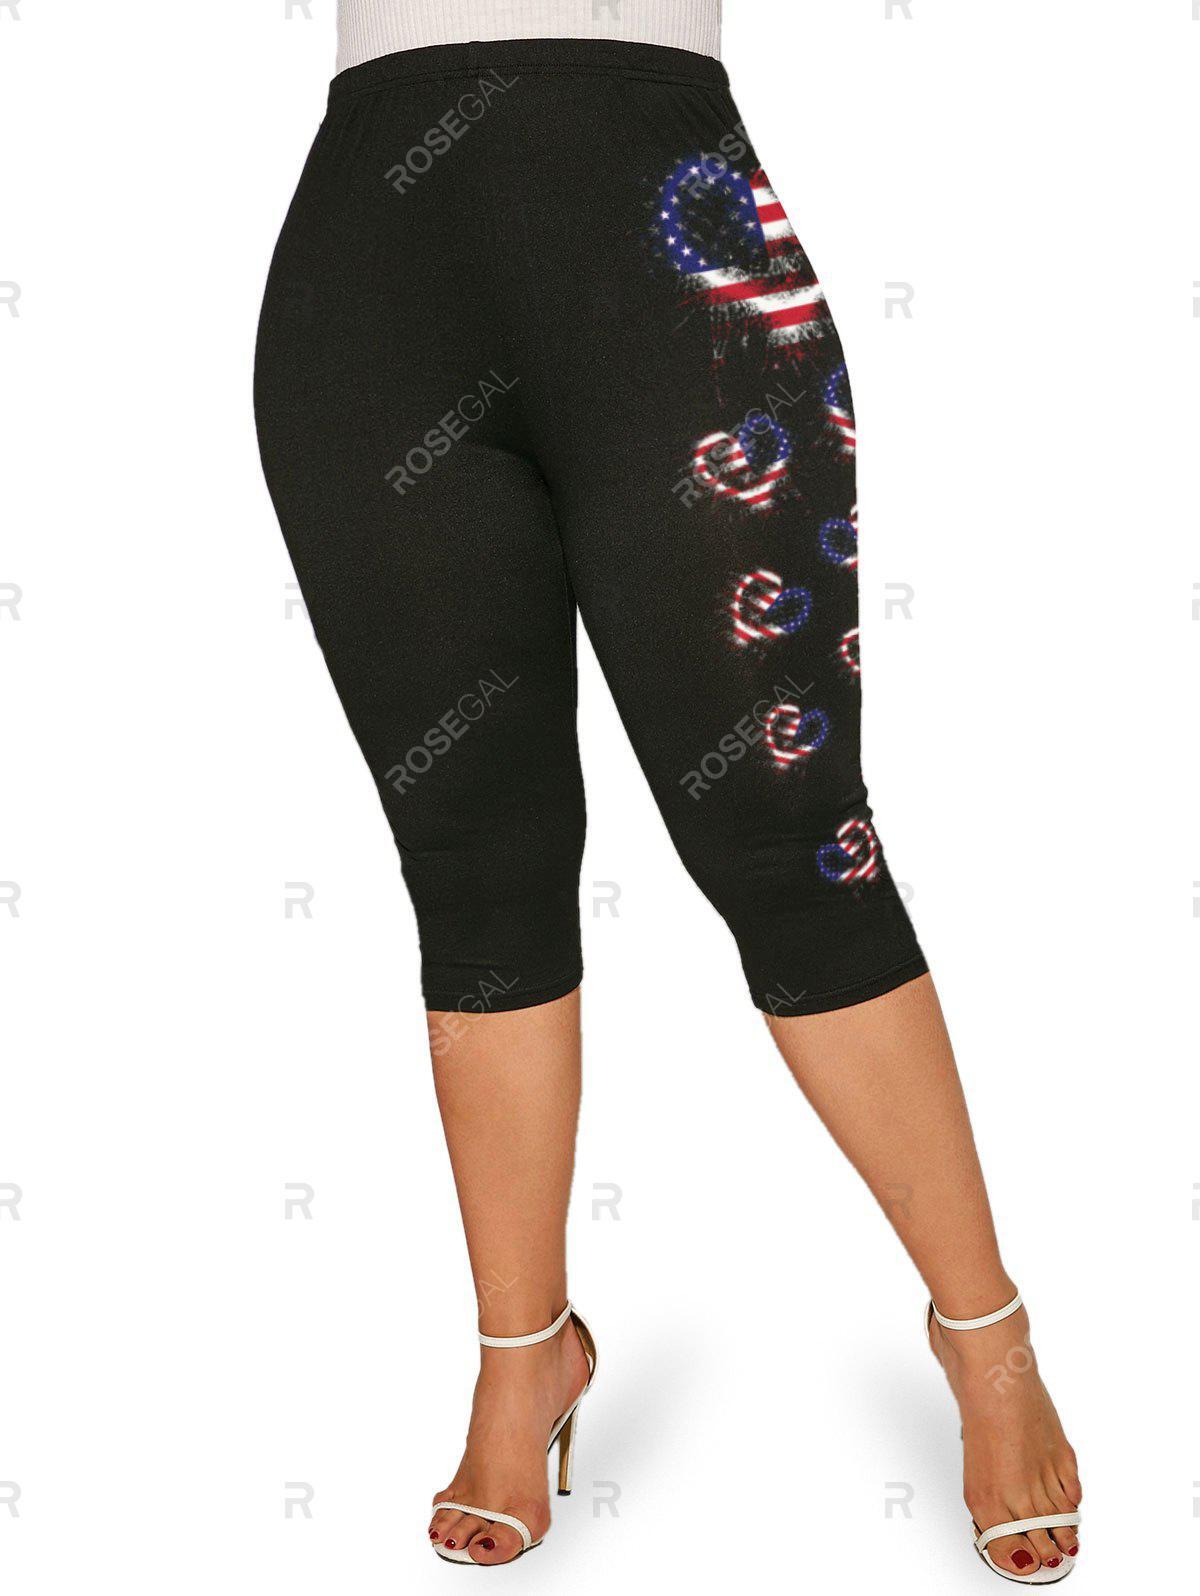 American Flag Heart Print Patriotic Tee and Leggings Plus Size Summer Outfit